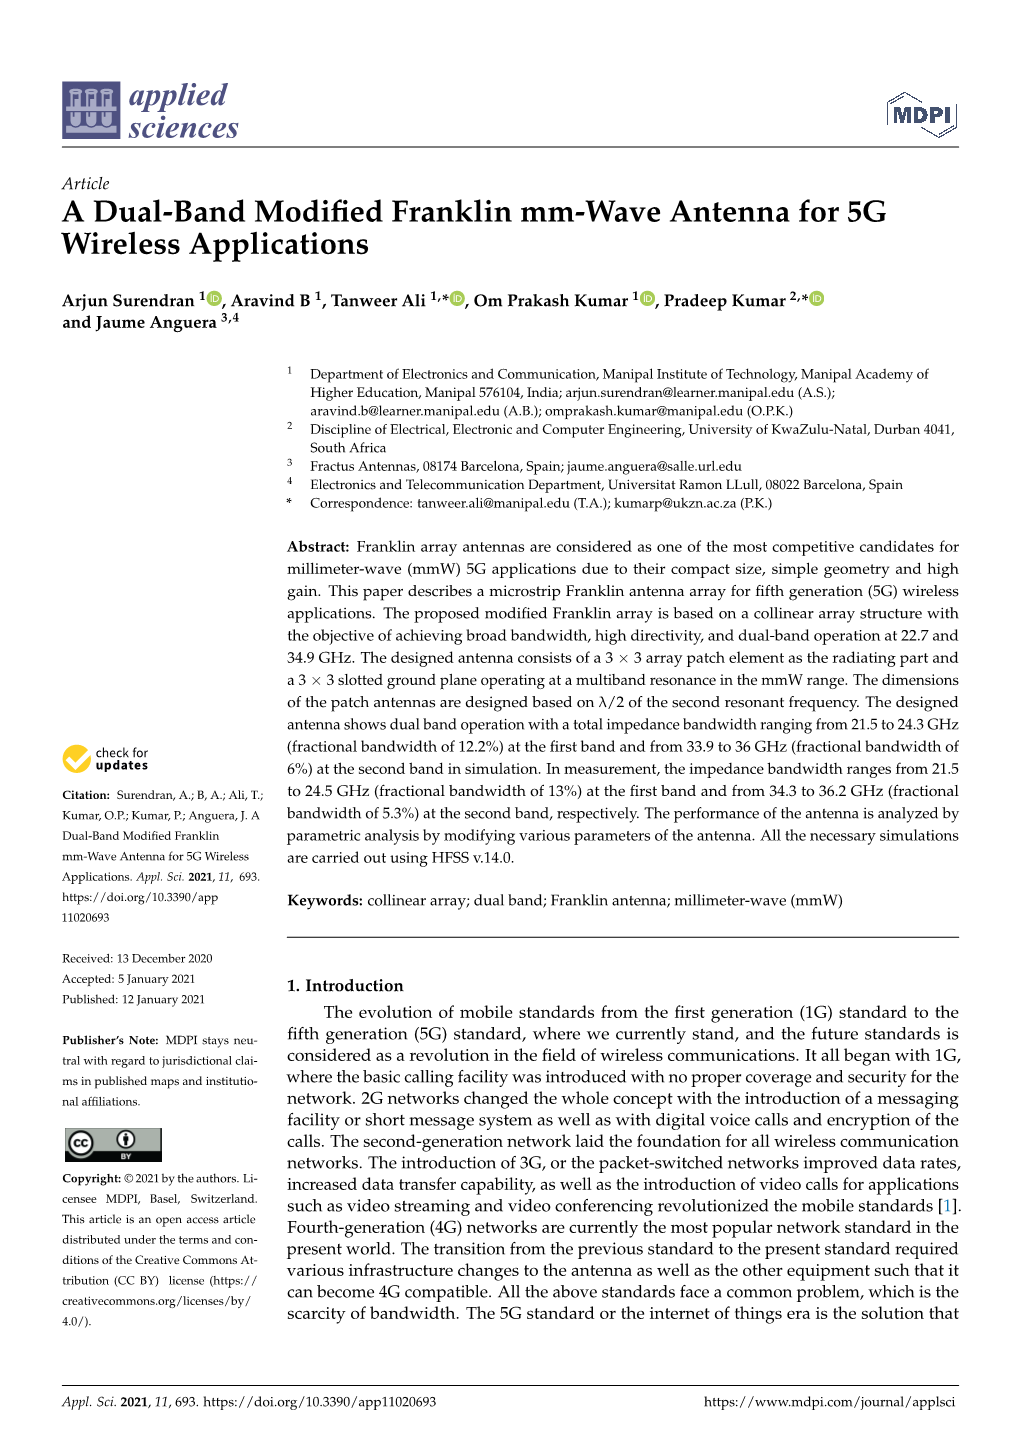 A Dual-Band Modified Franklin Mm-Wave Antenna for 5G Wireless Applications